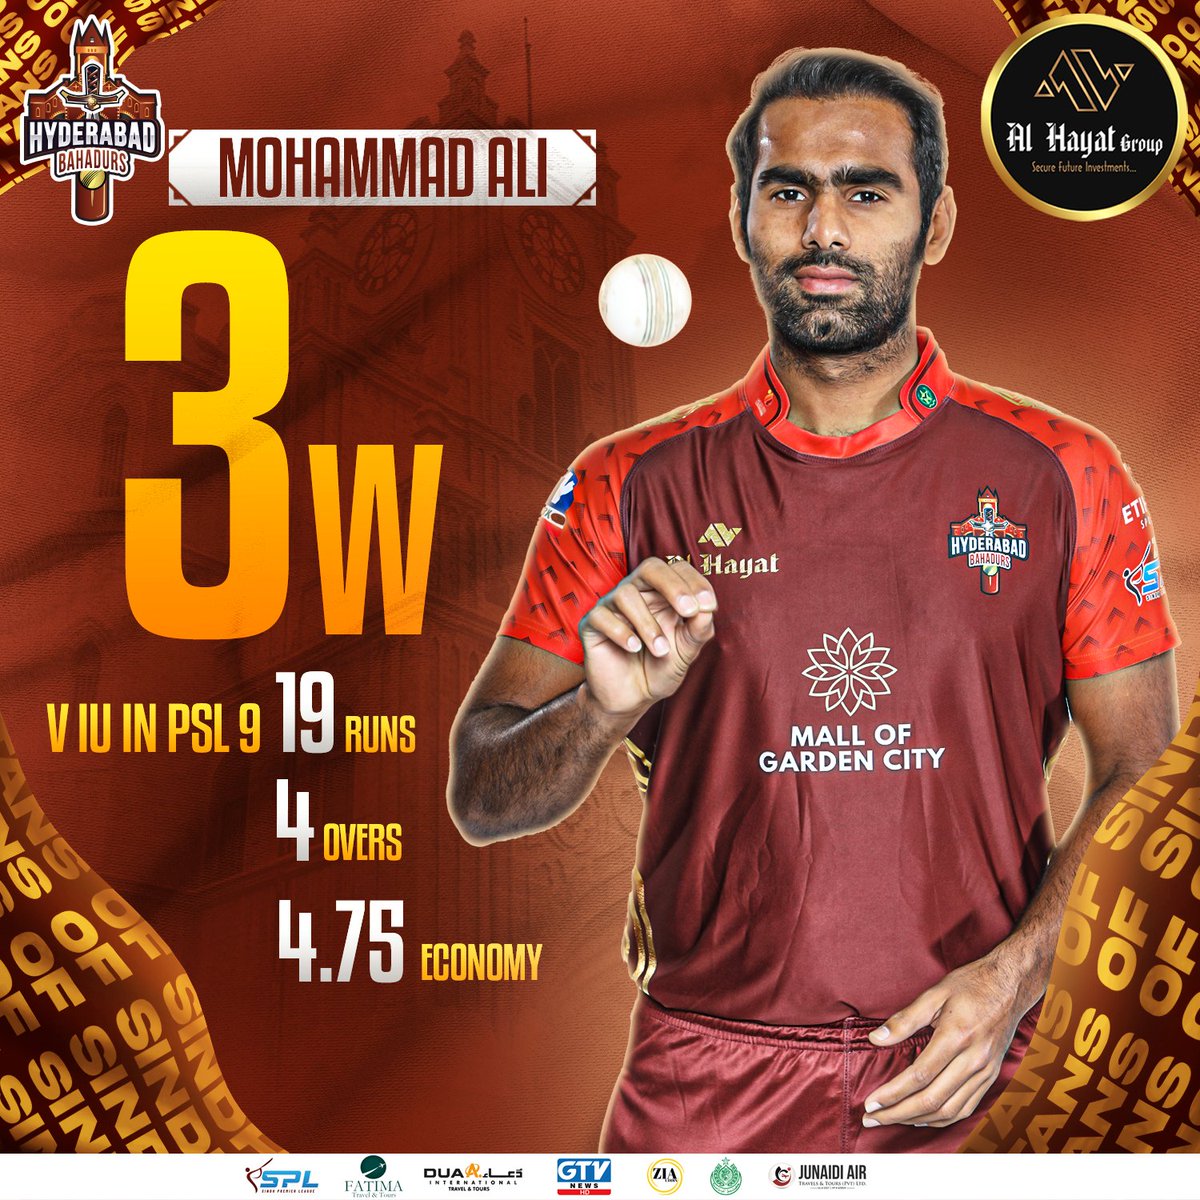 Mohammad Ali a.k.a Daisy 🌼

Impactful and precise bowling performance by Mohammad Ali 👌🎯

#TitansOfSindh | #AlHayatGroup | #ZBKSPL